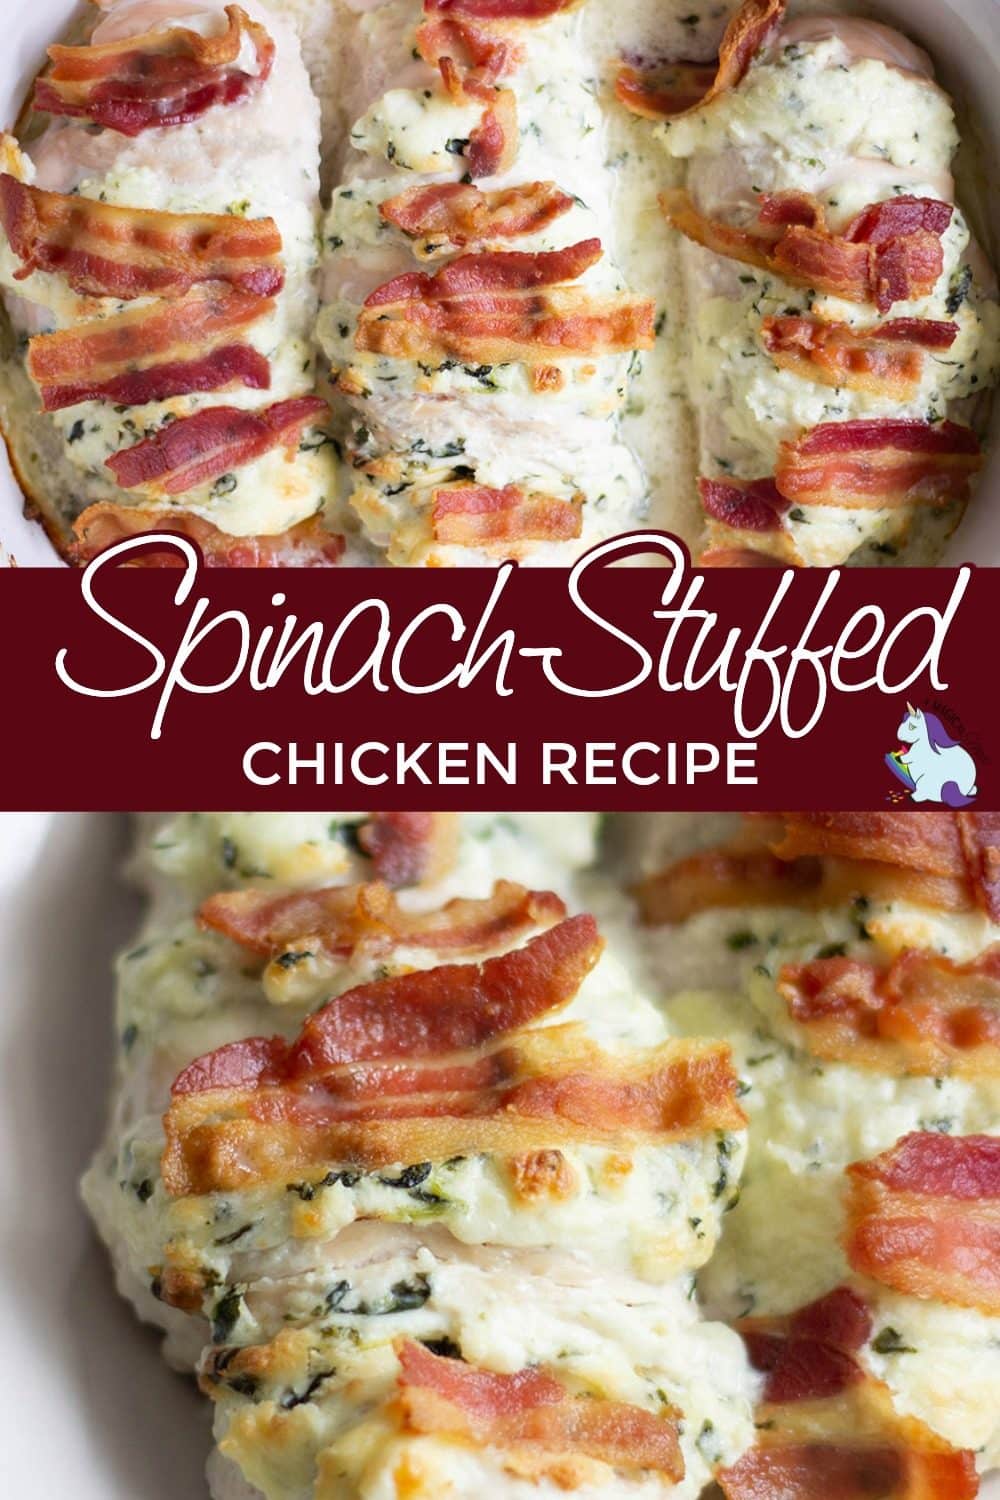 Chicken stuffed with bacon and spinach.